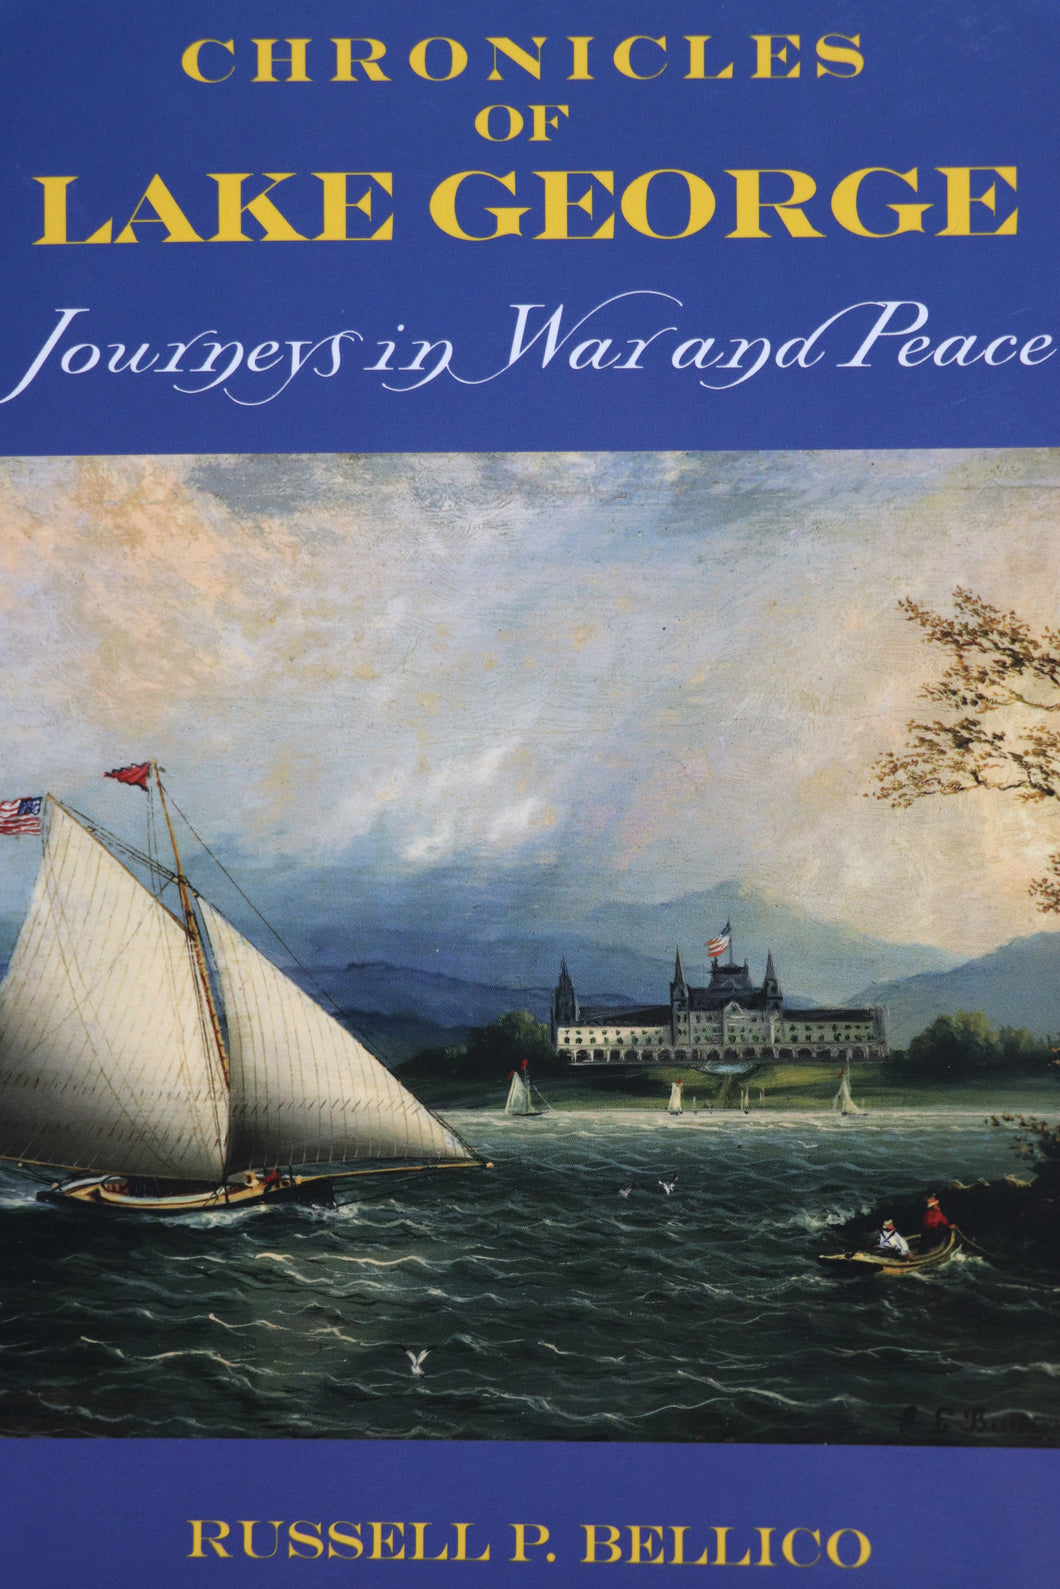 Chronicles of Lake George: Journey's in War & Peace